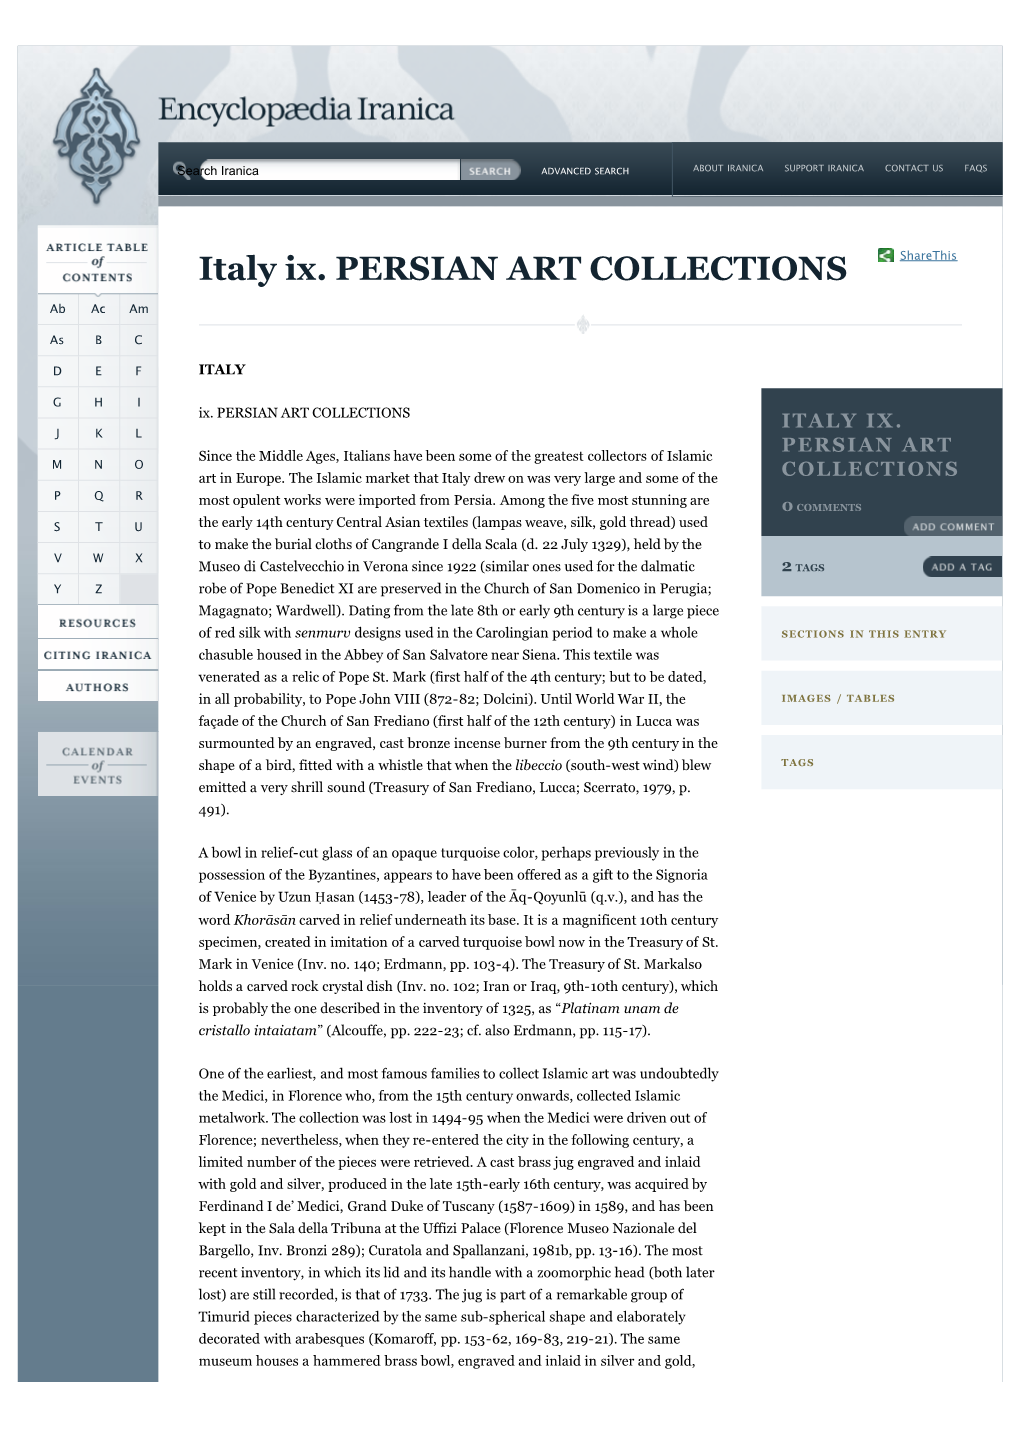 Italy Ix. PERSIAN ART COLLECTIONS Sharethis